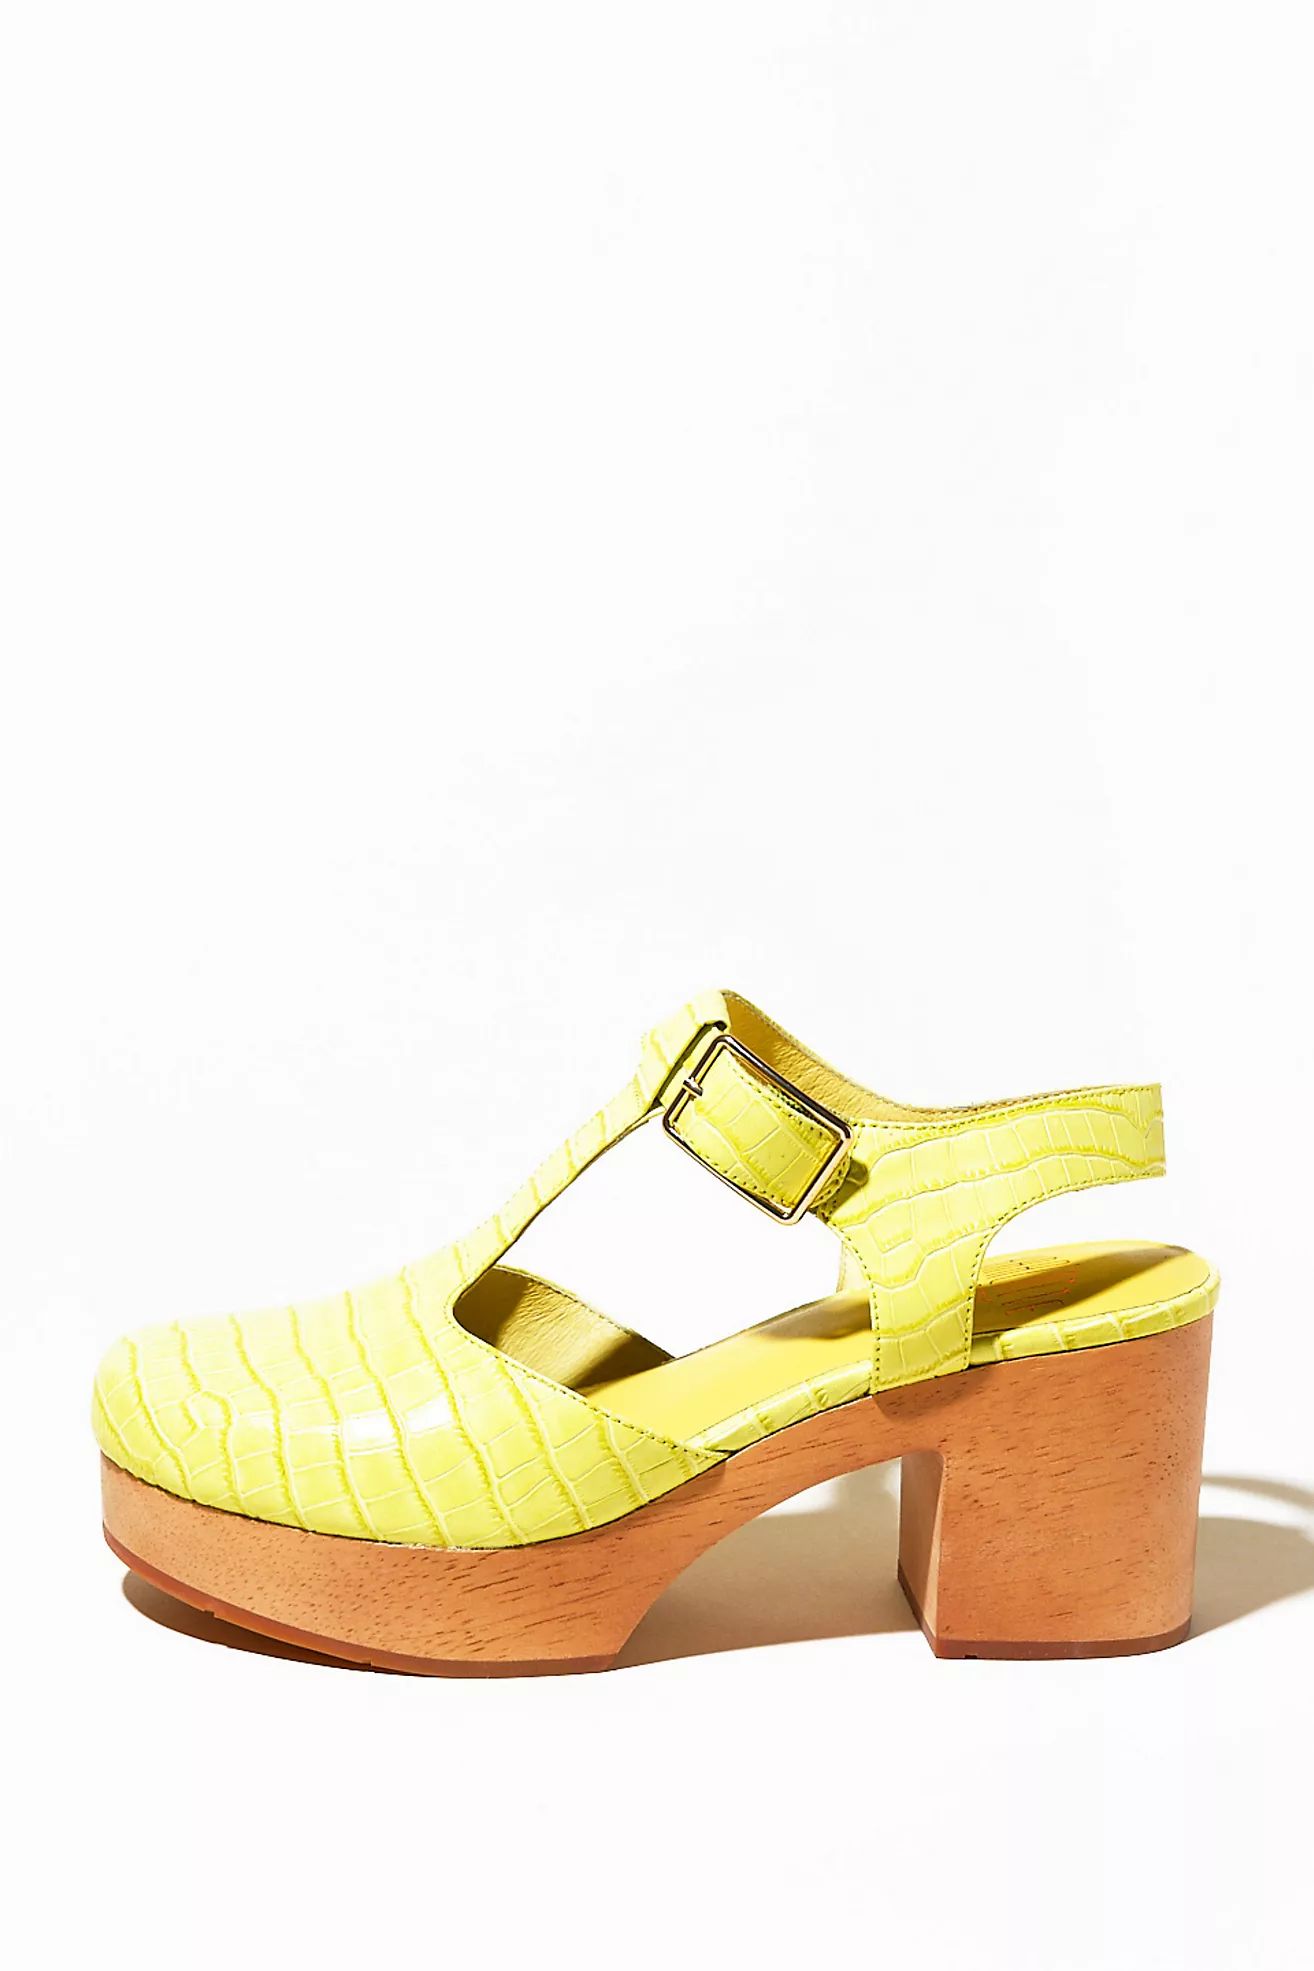 Charlotte Stone Molly Clogs | Anthropologie (US)